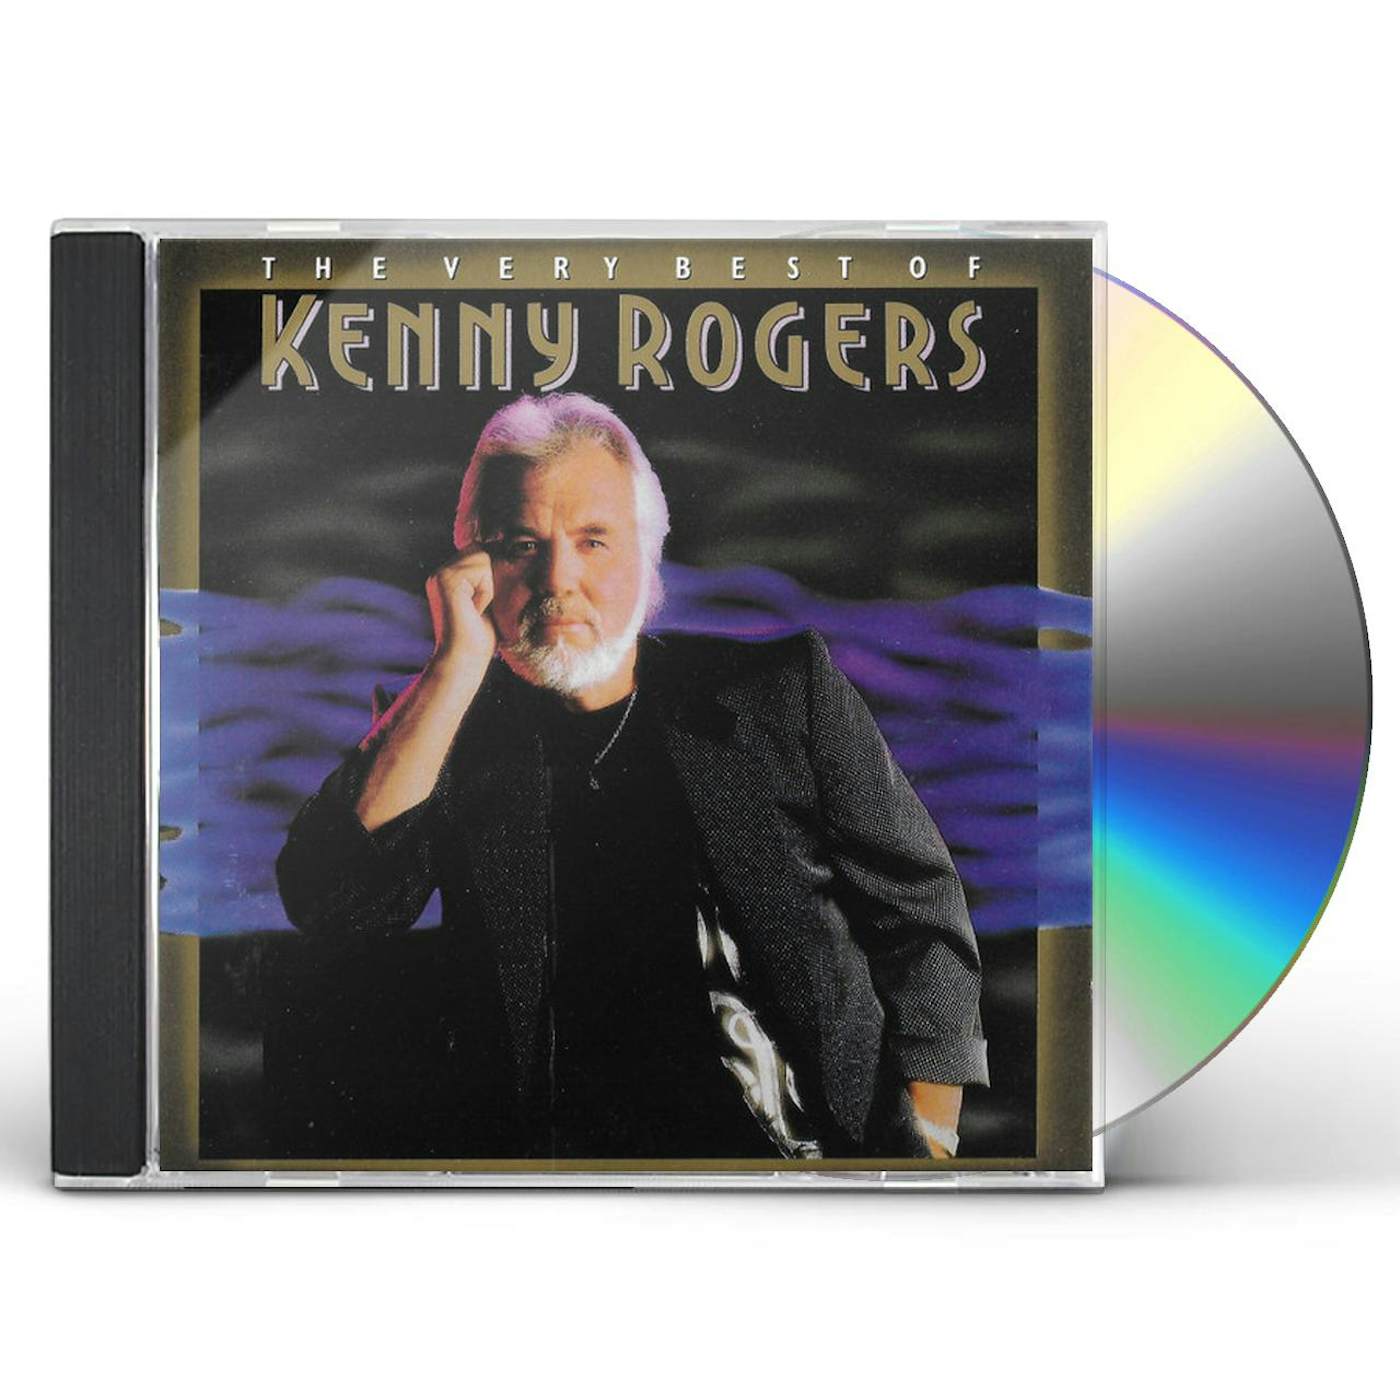 VERY BEST OF KENNY ROGERS CD